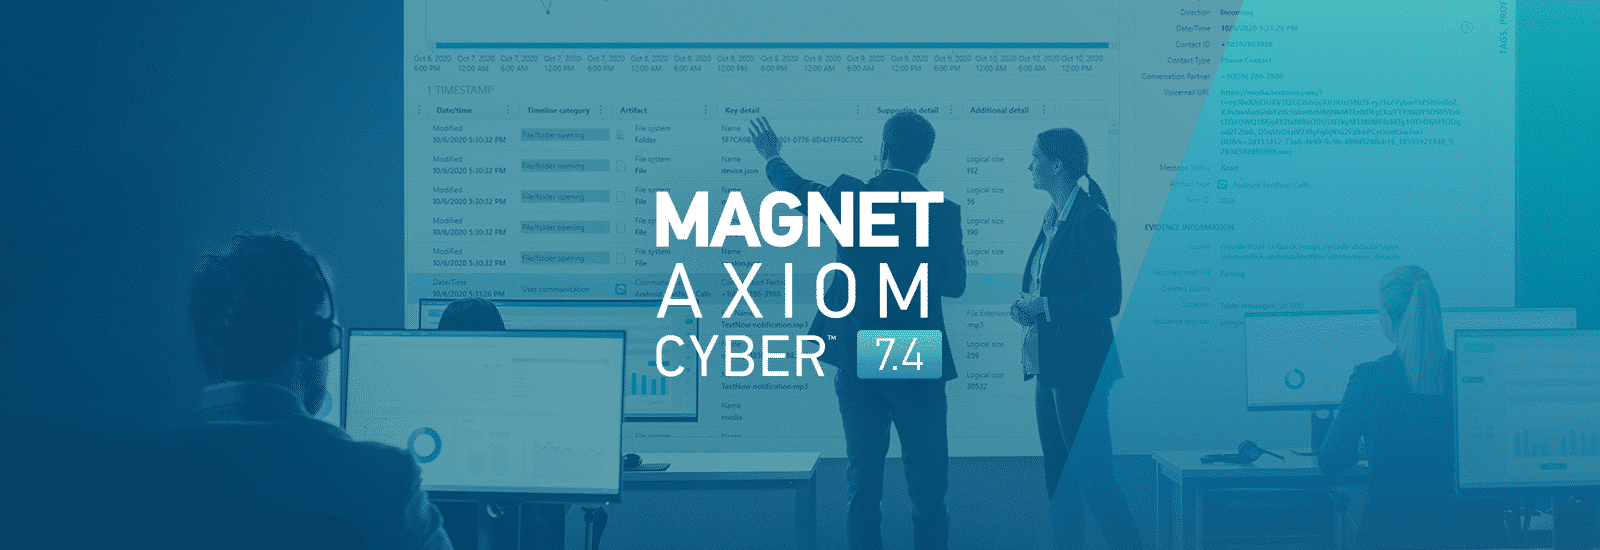 A decorative header for the Magnet AXIOM Cyber 7.4 release